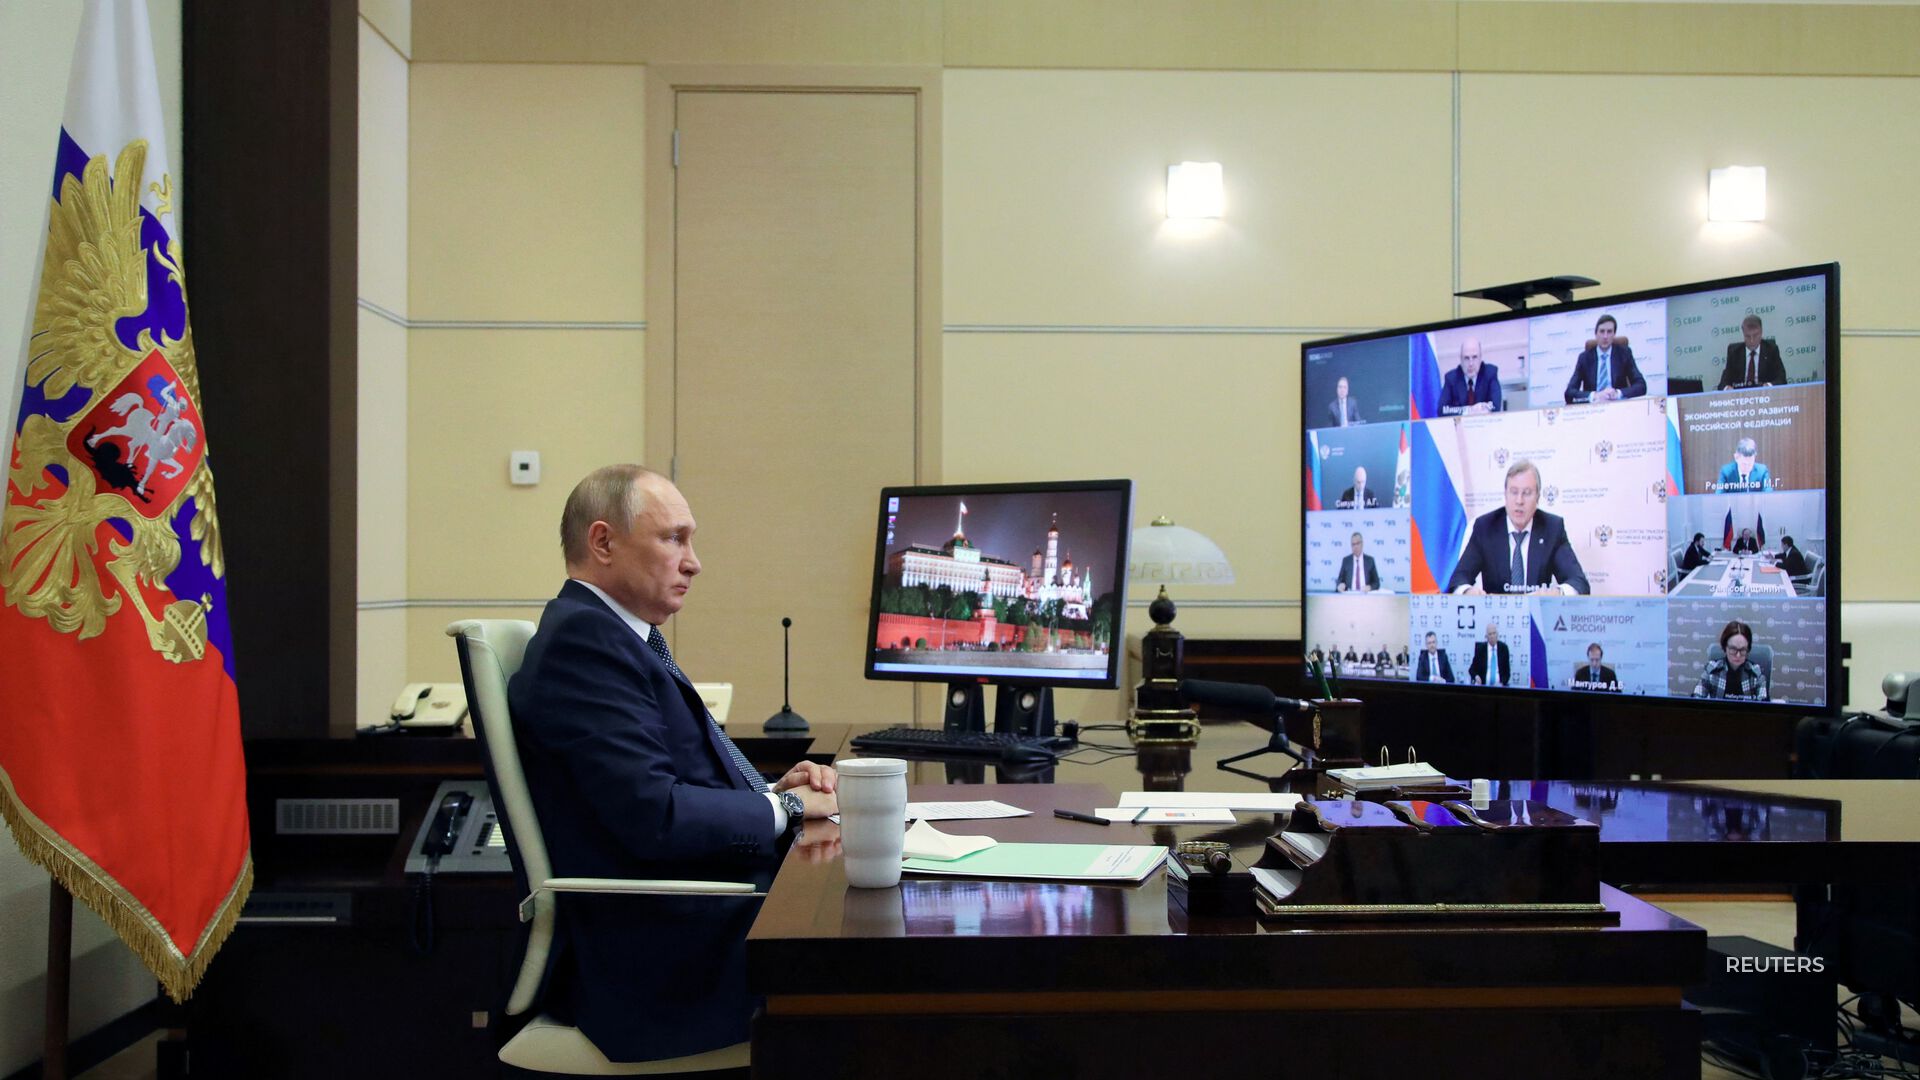 Putin appears to not be on the same page with his advisers and troops.